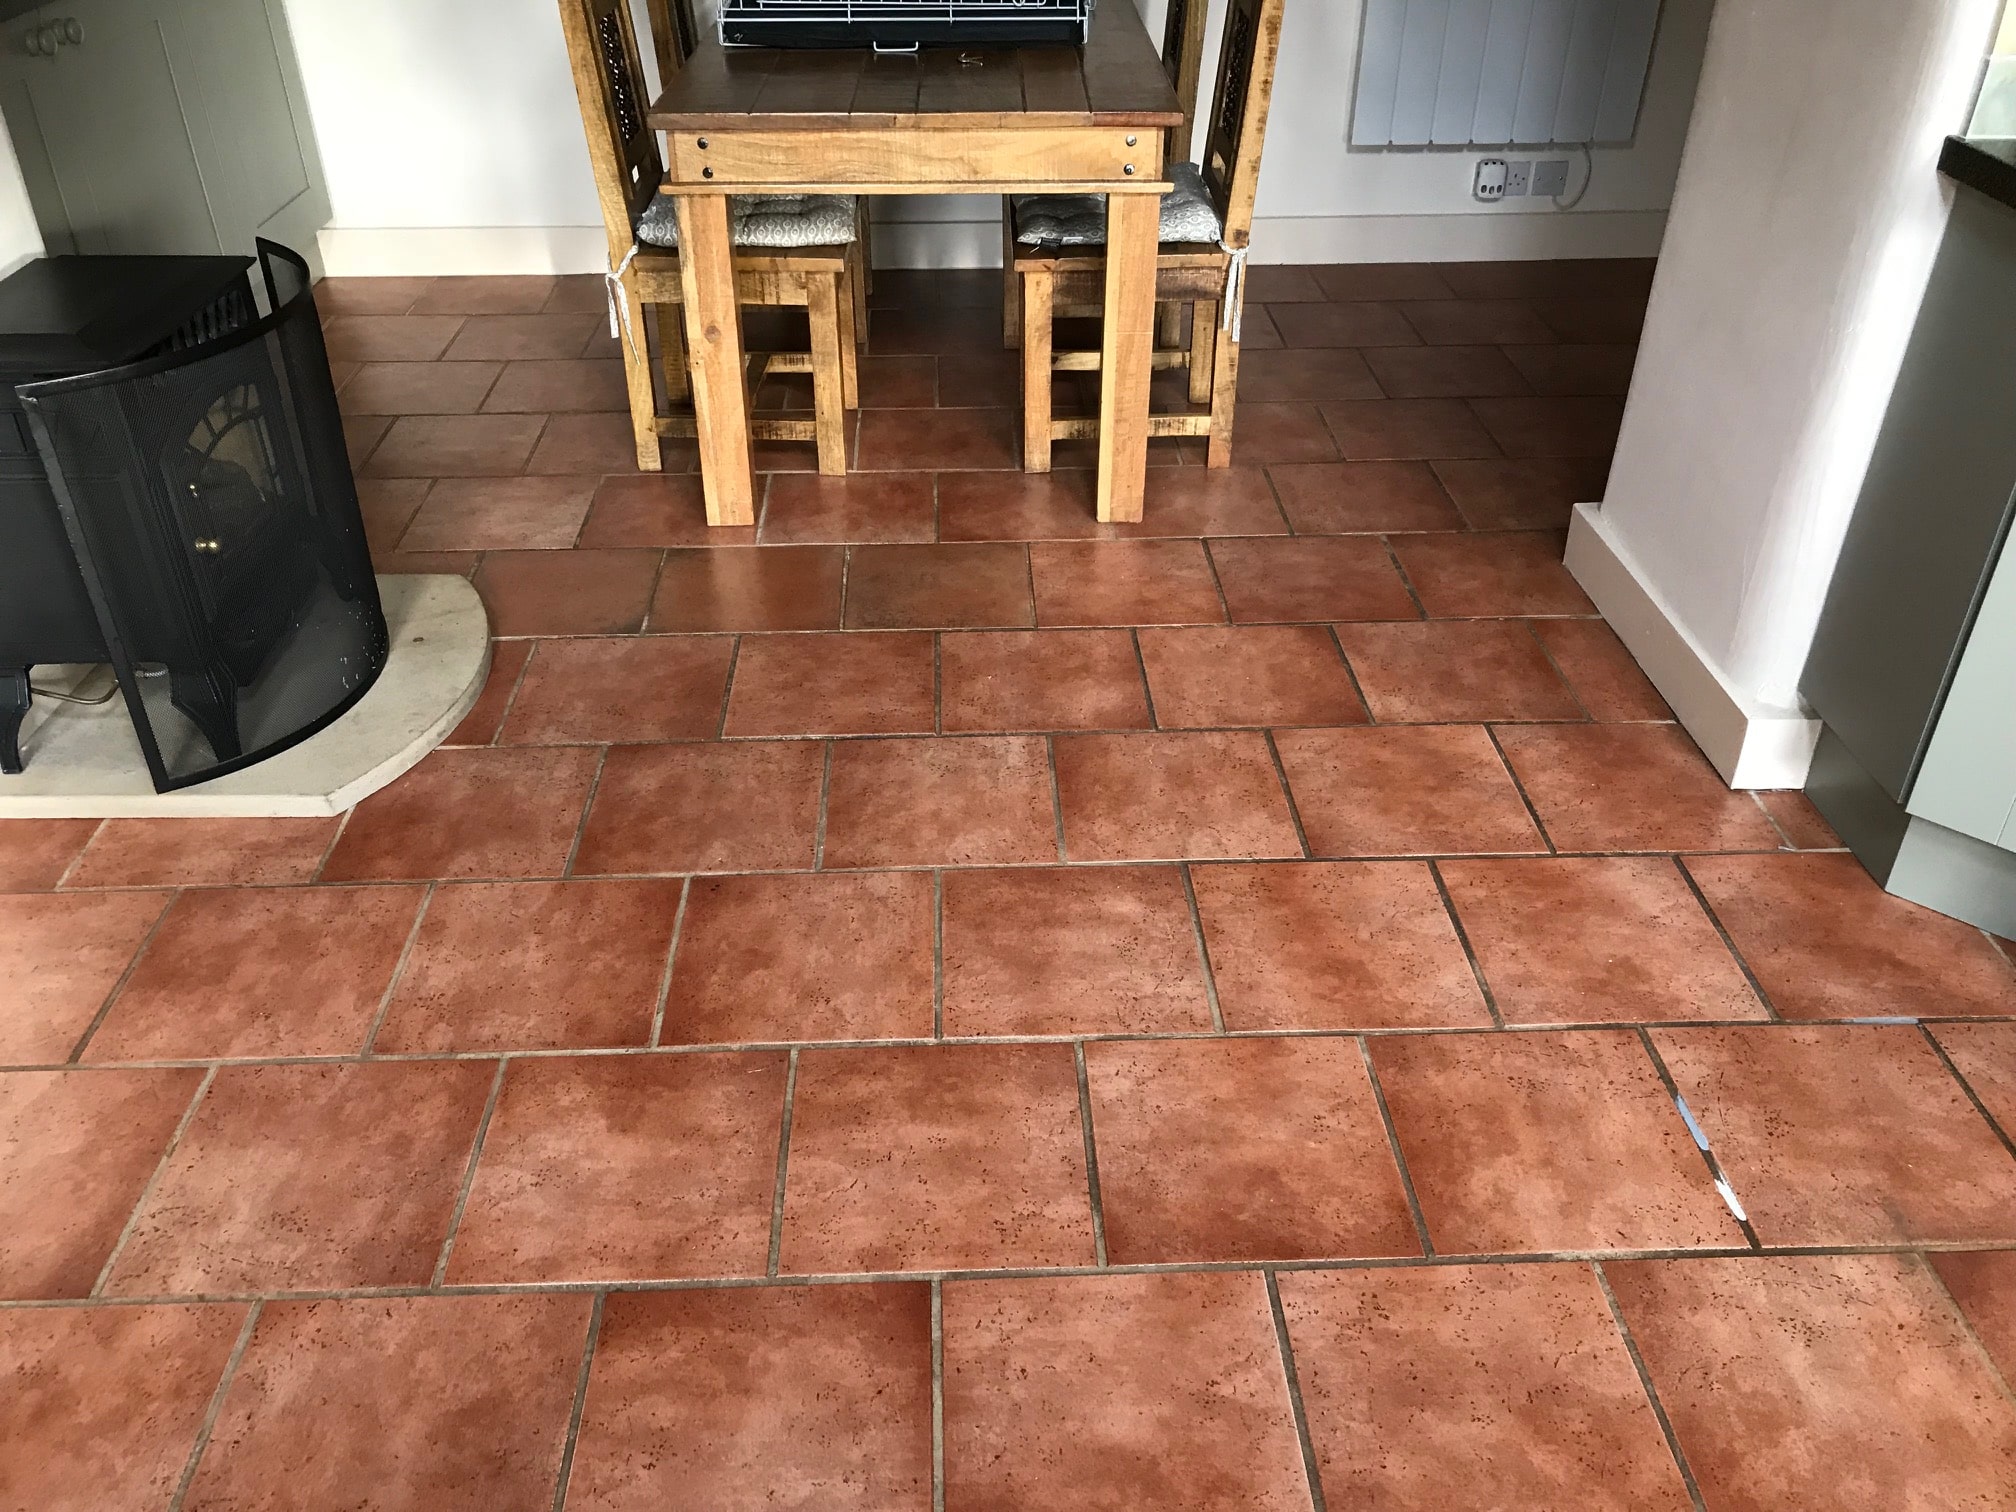 Ceramic Tiled Kitchen Floor Before Grout Colouring Ulverston